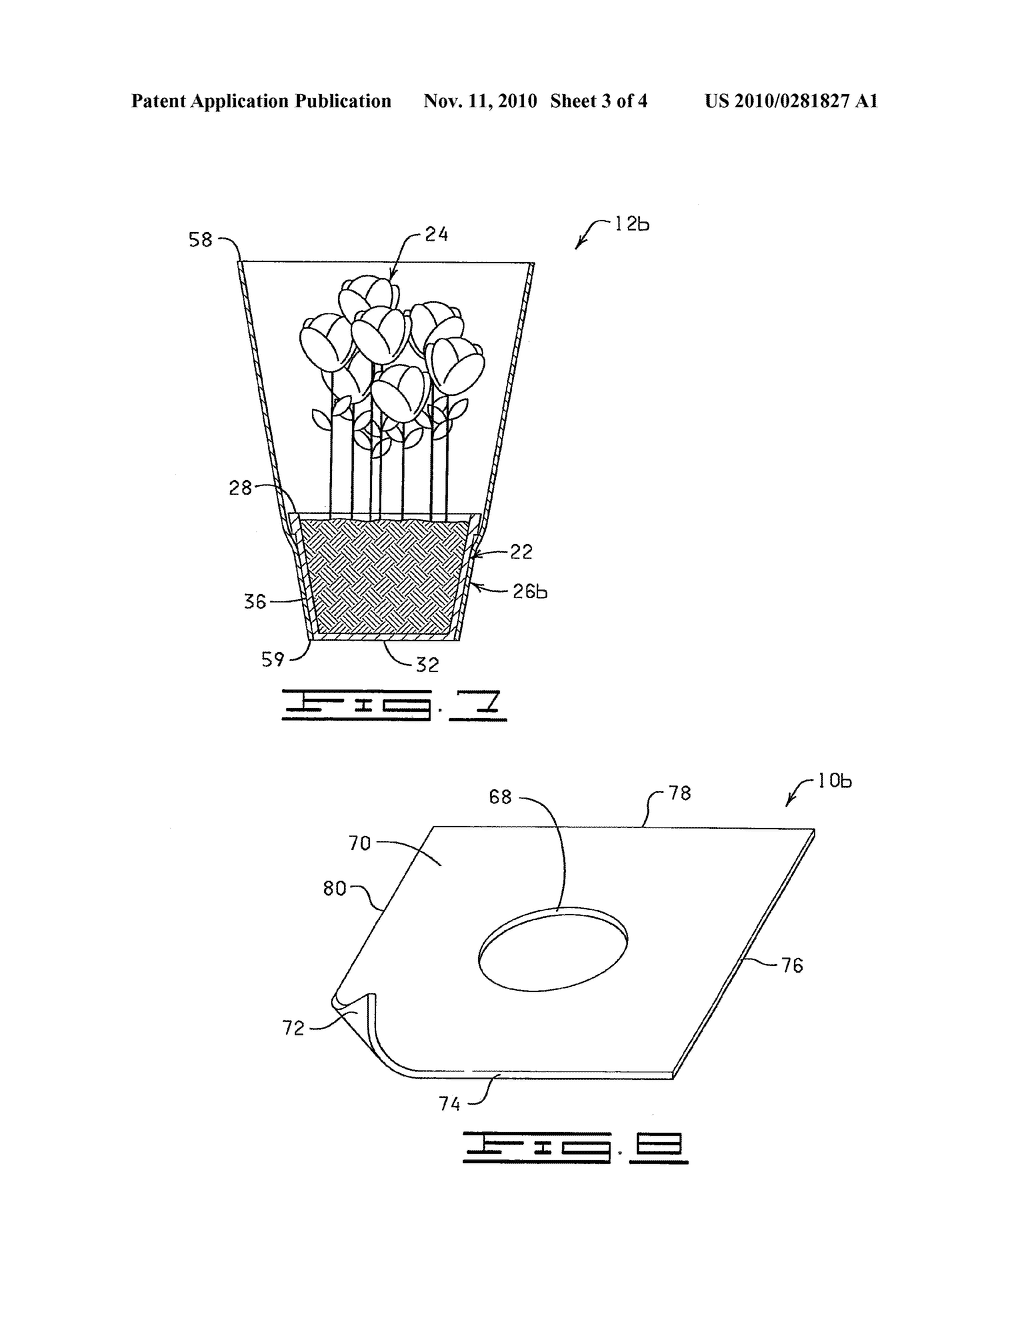 METHOD OF PROVIDING A DECORATIVE COVER FOR A FLOWER POT FORMED OF A HEAT SHRINKABLE MATERIAL - diagram, schematic, and image 04